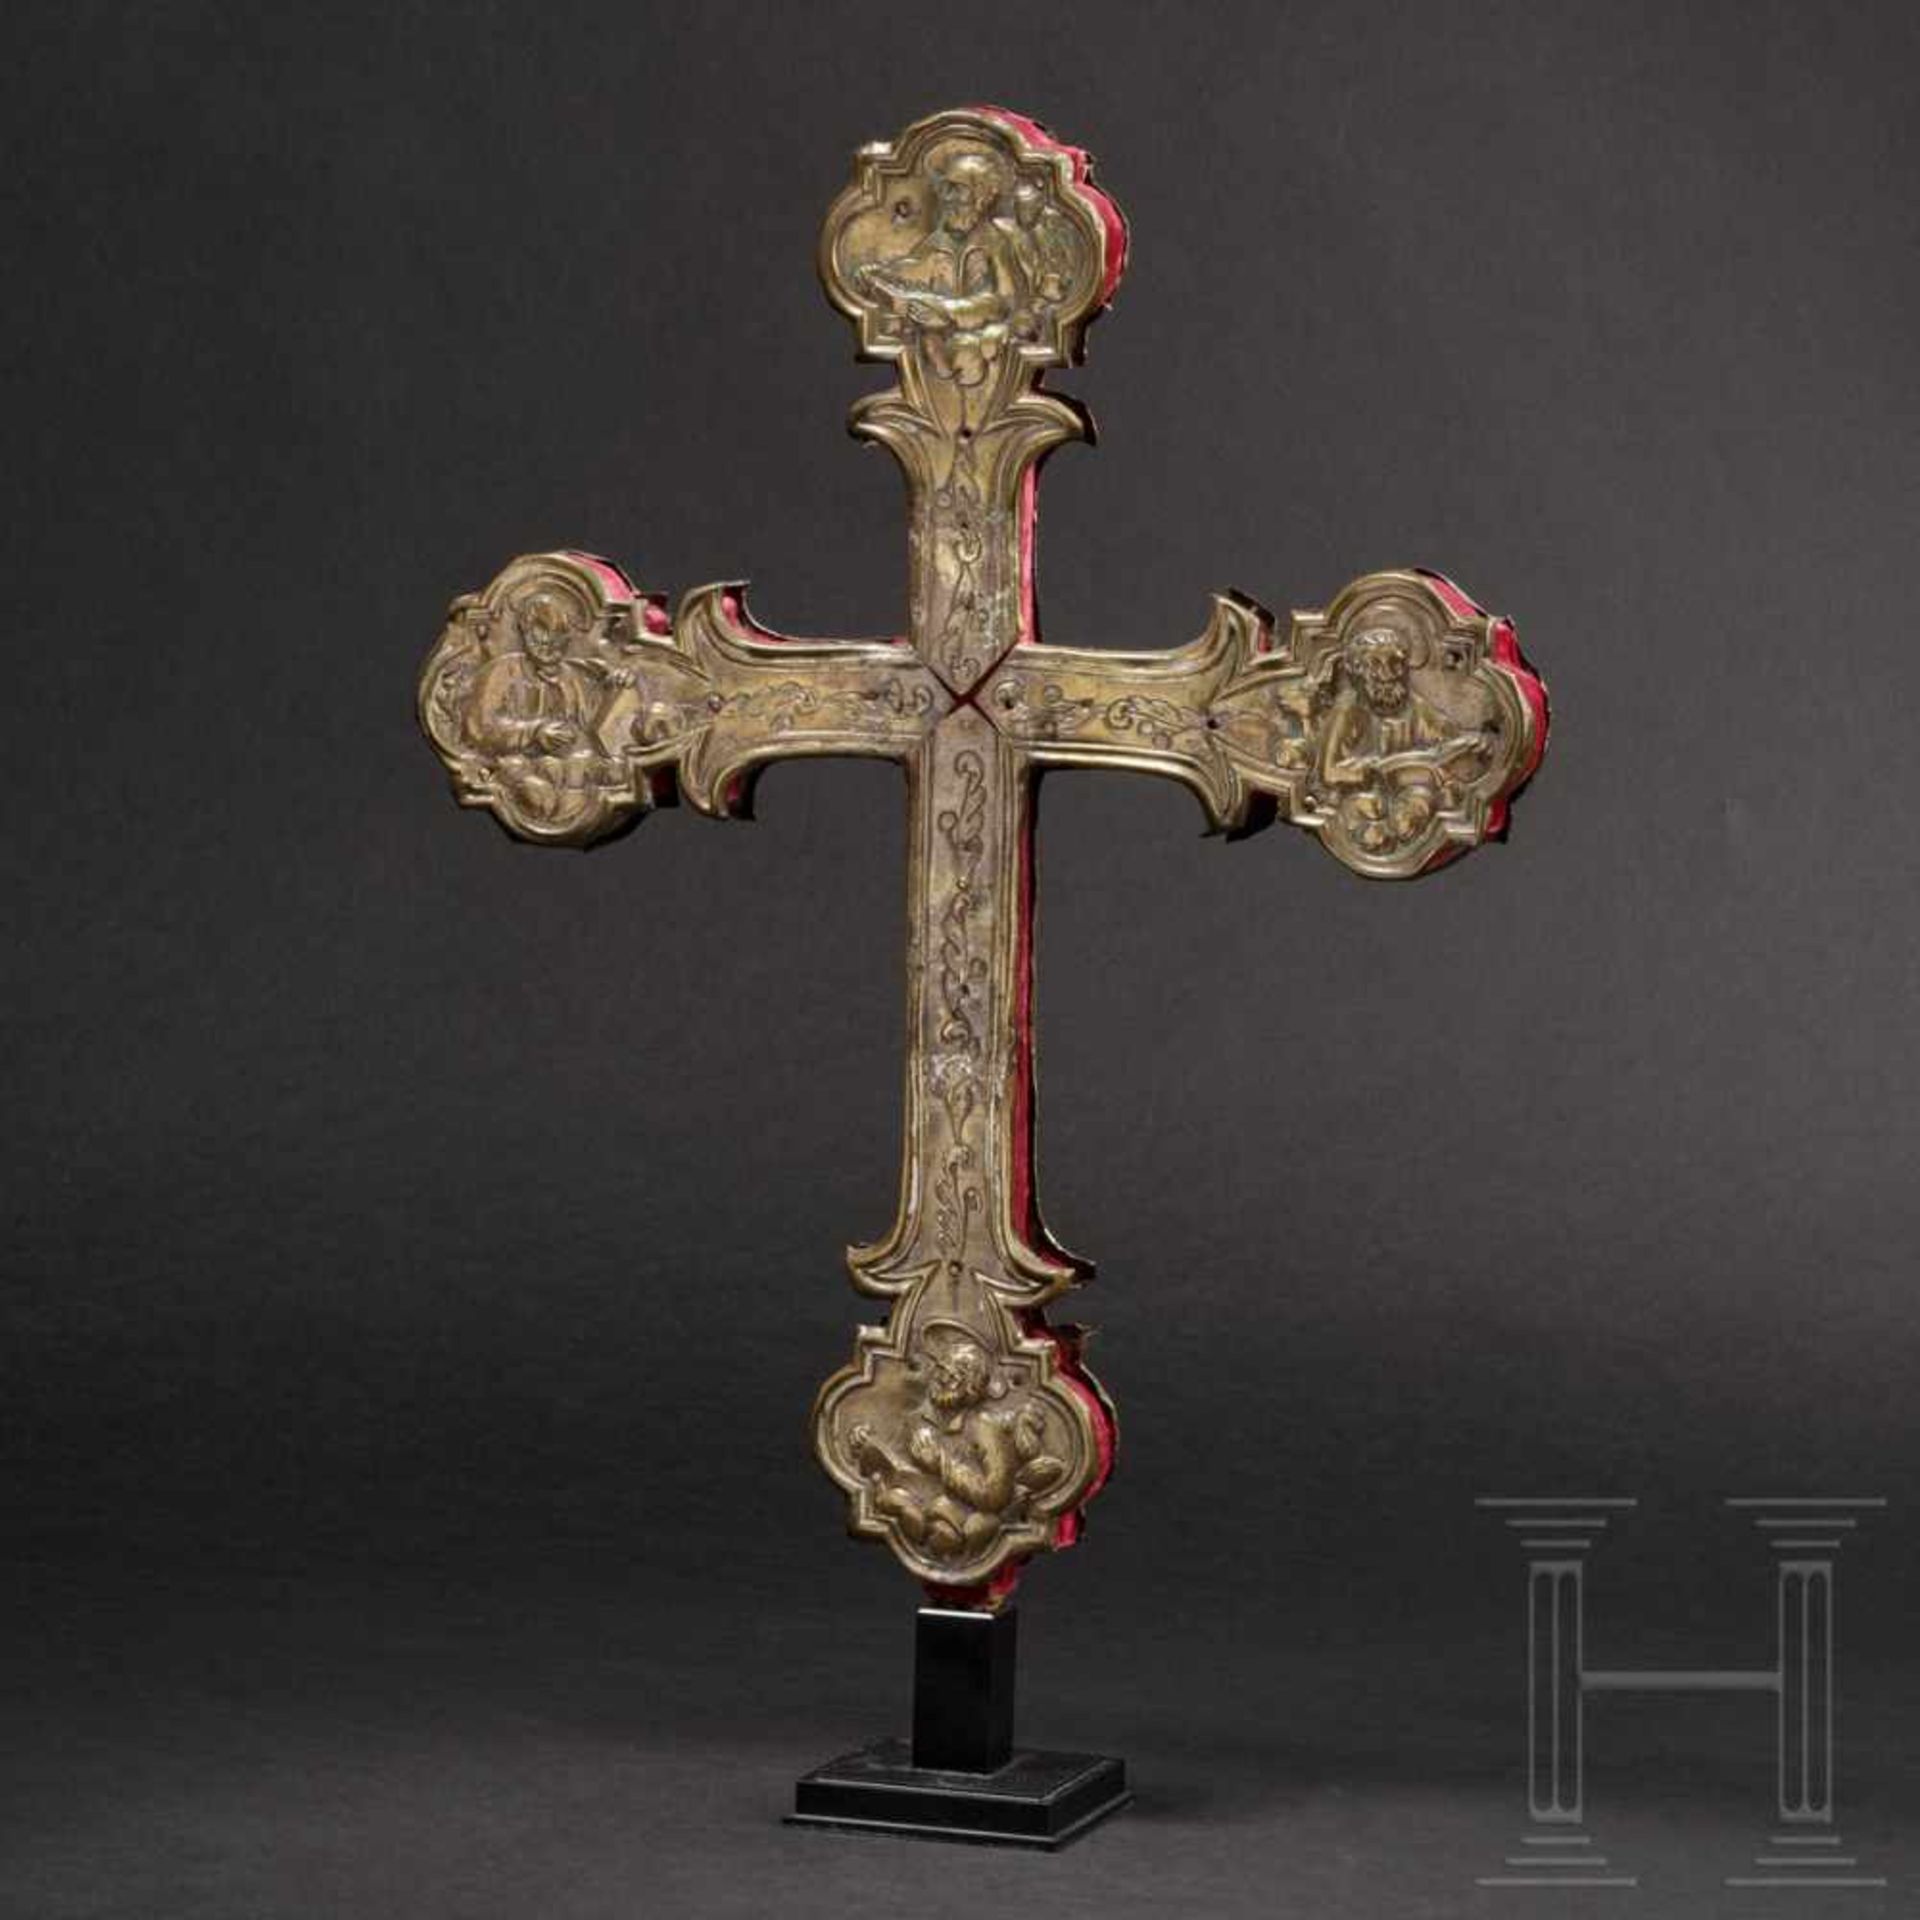 A rare French Baroque processional cross, 16th/17th centuryCarved wooden core. The front covered